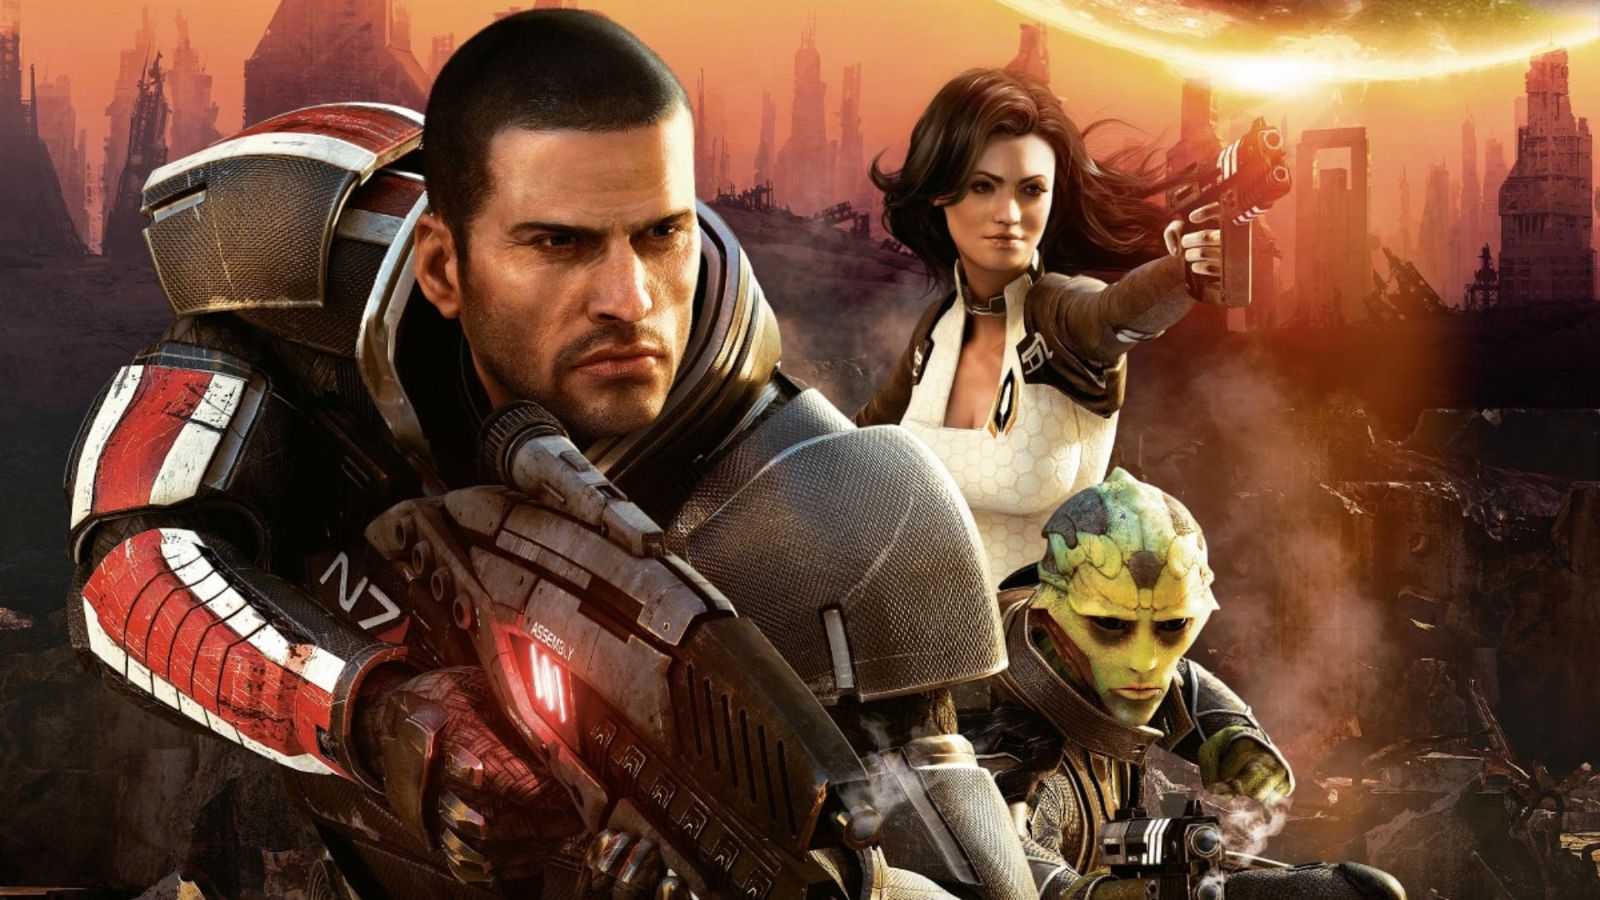 mass effect 4 ditches open-world for the classic rpg format